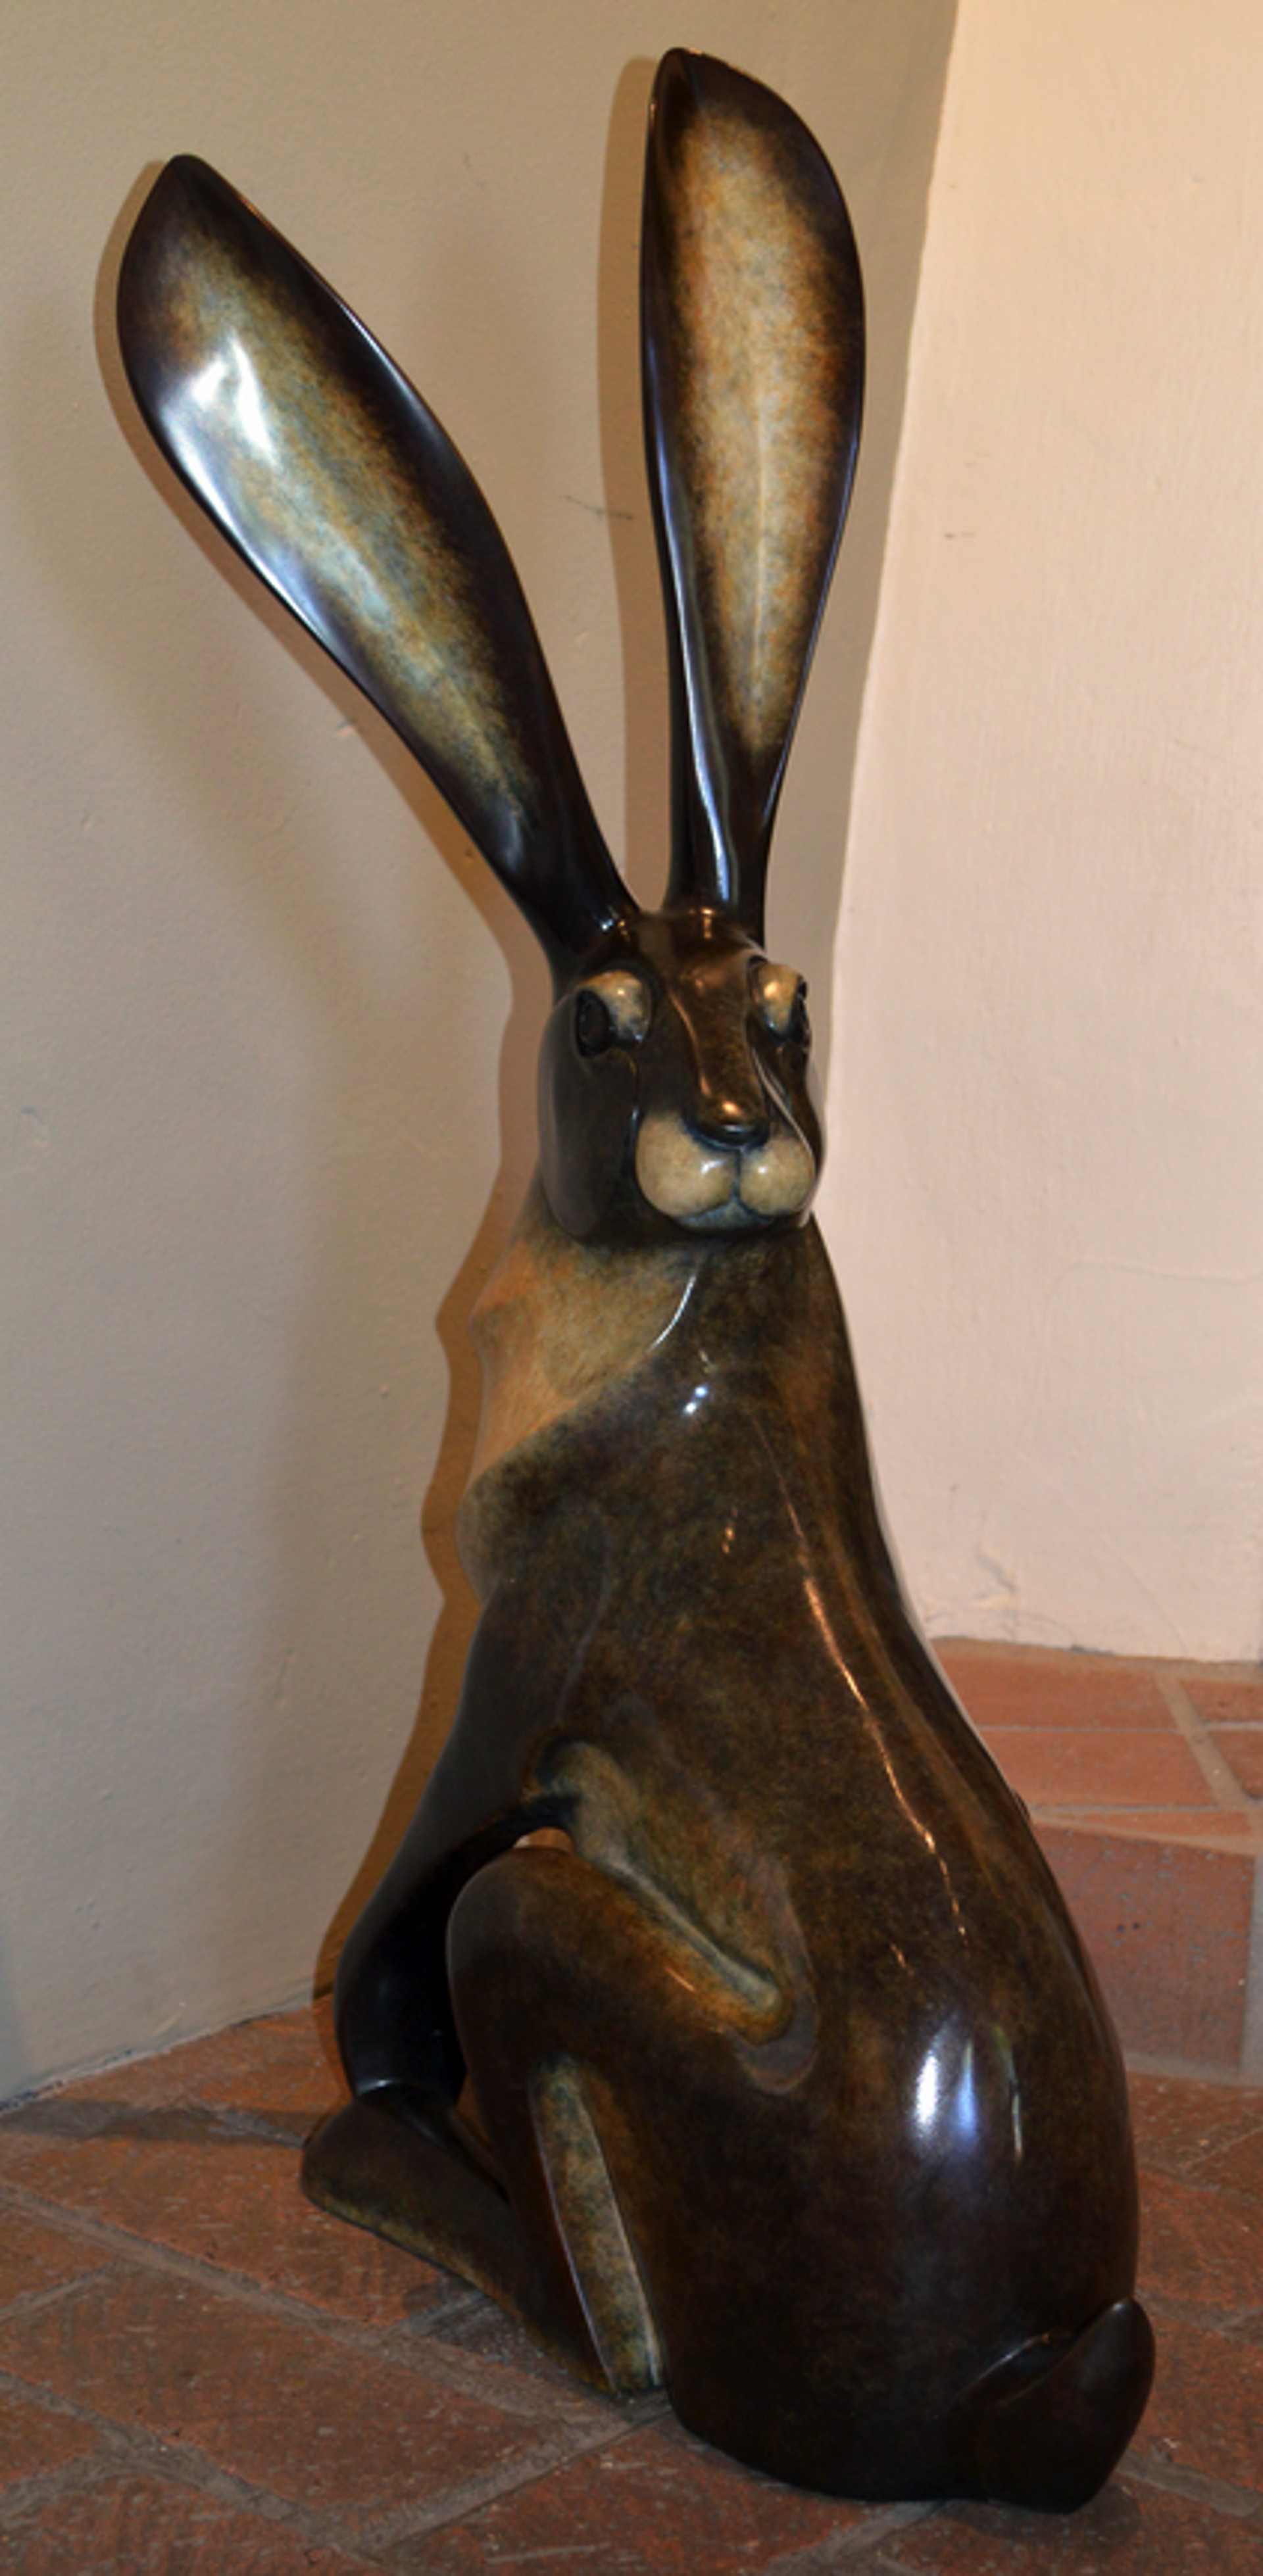 Sitting Hare by David Meredith